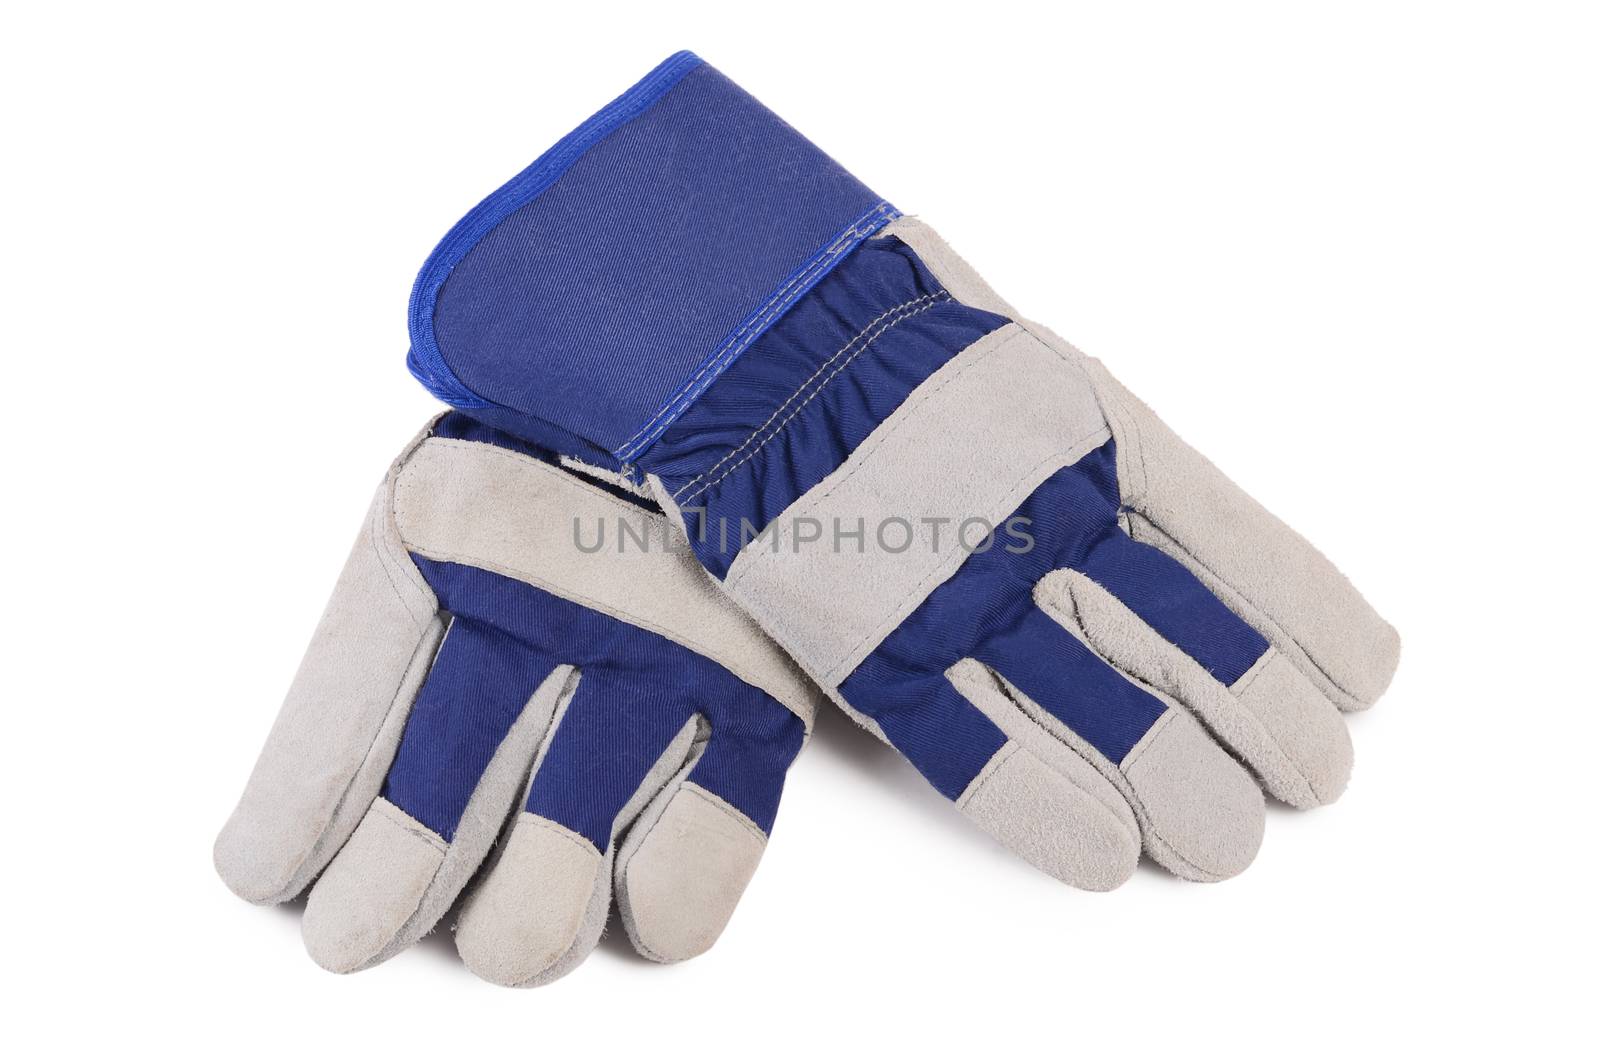 Working mens gloves isolated on white background